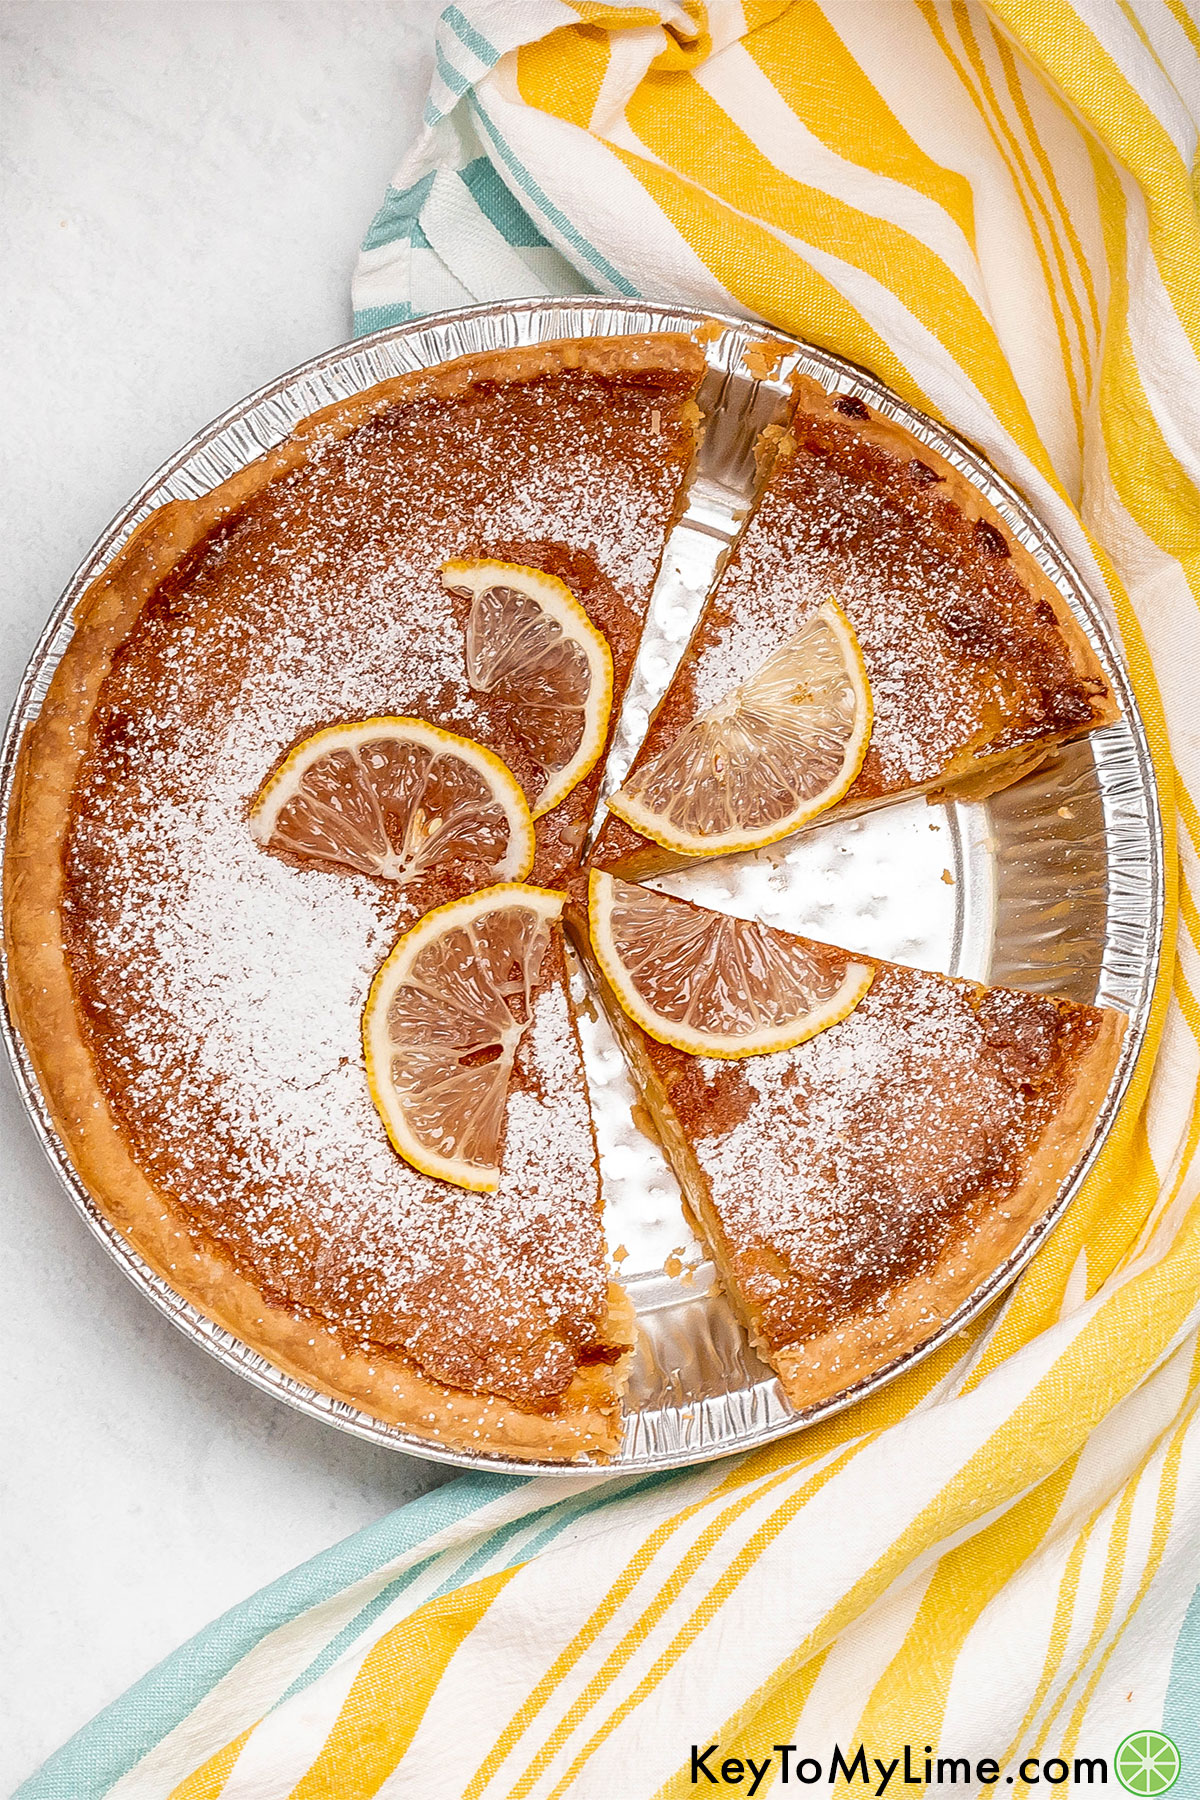 An overhead image of a partially cut pie with multiple slices missing.